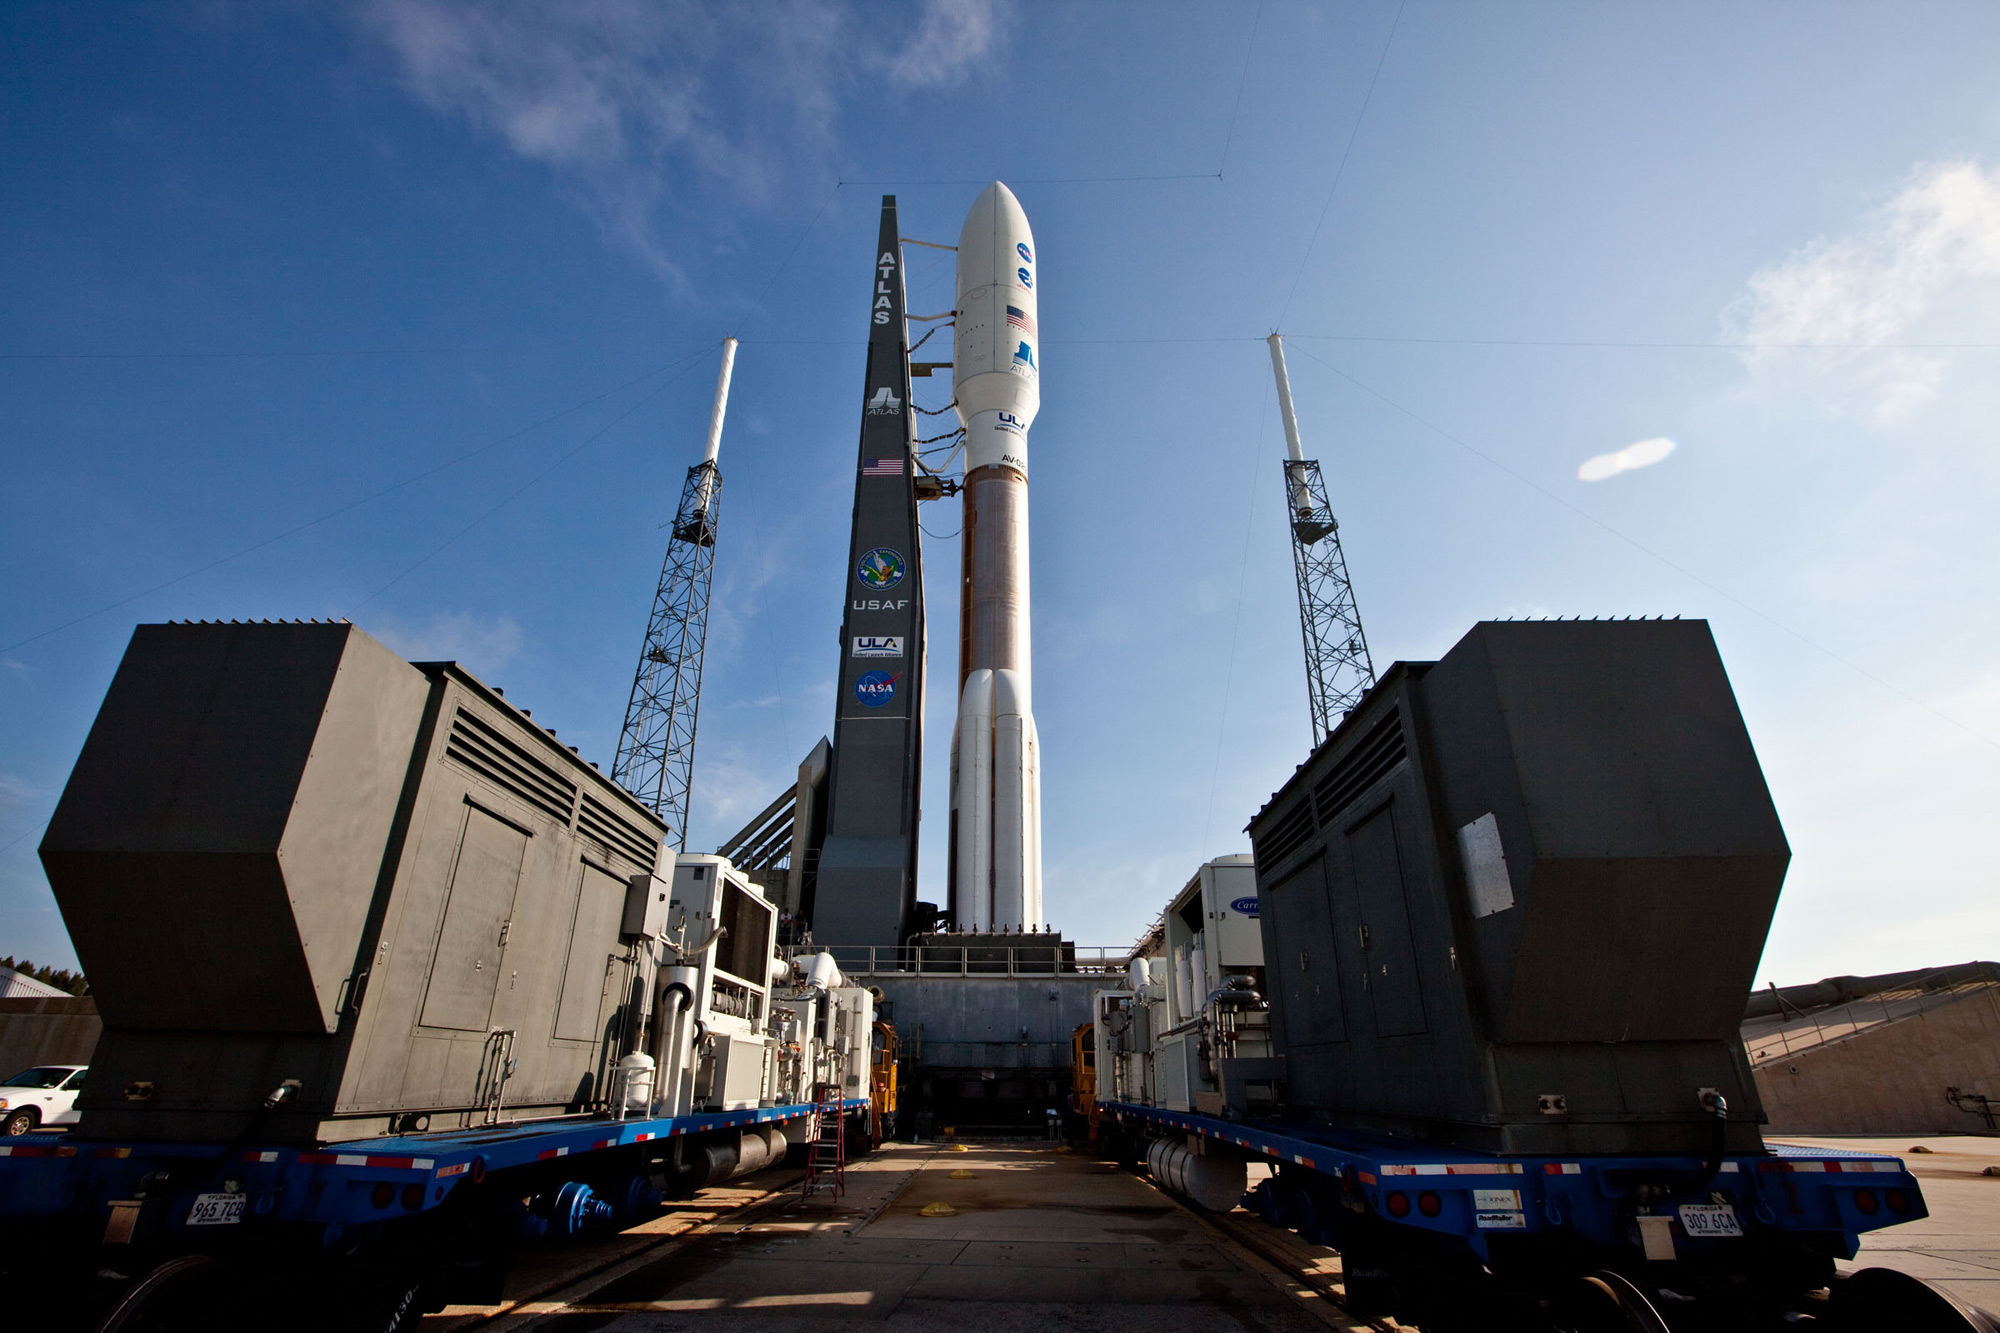 Atlas 5 Carrying Juno Spacecraft Against a Blue Sky